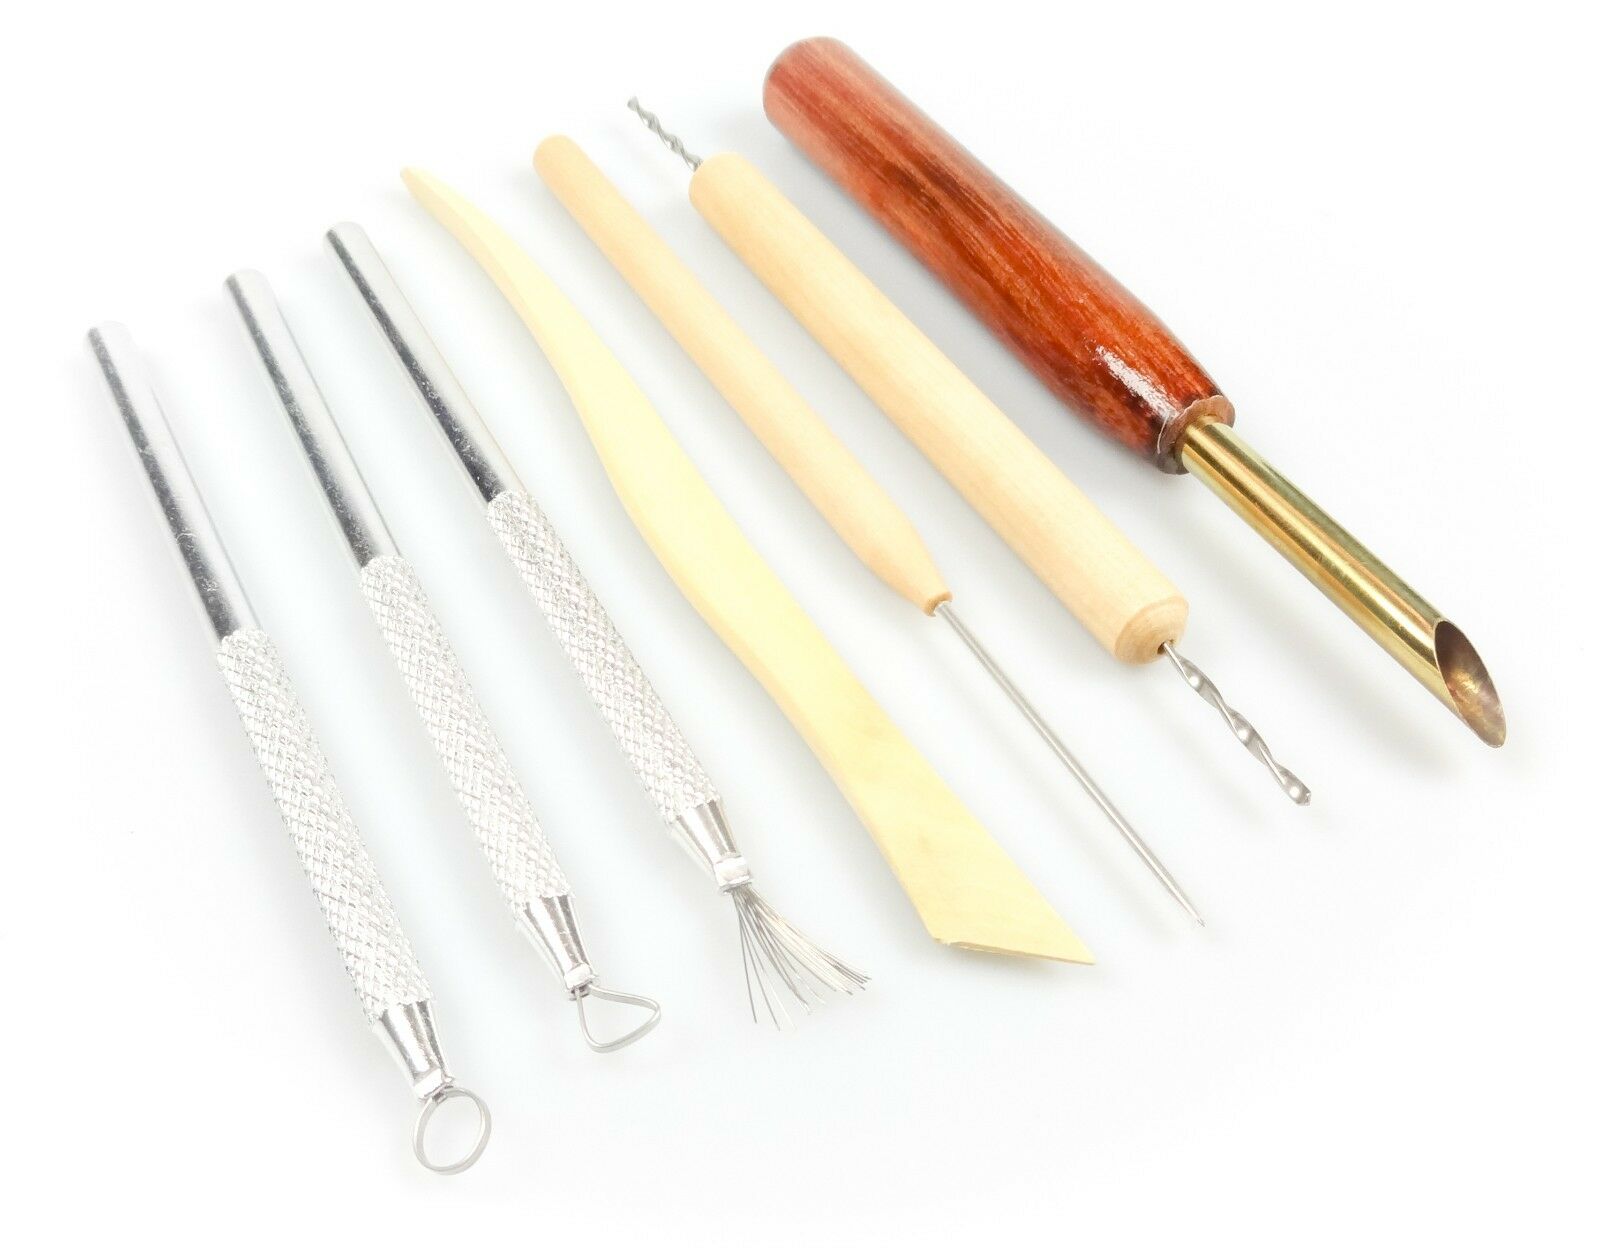 New 7pc Clay Sculpting Set Kit Wax Carving Pottery Tool Shaping Polymer Modeling